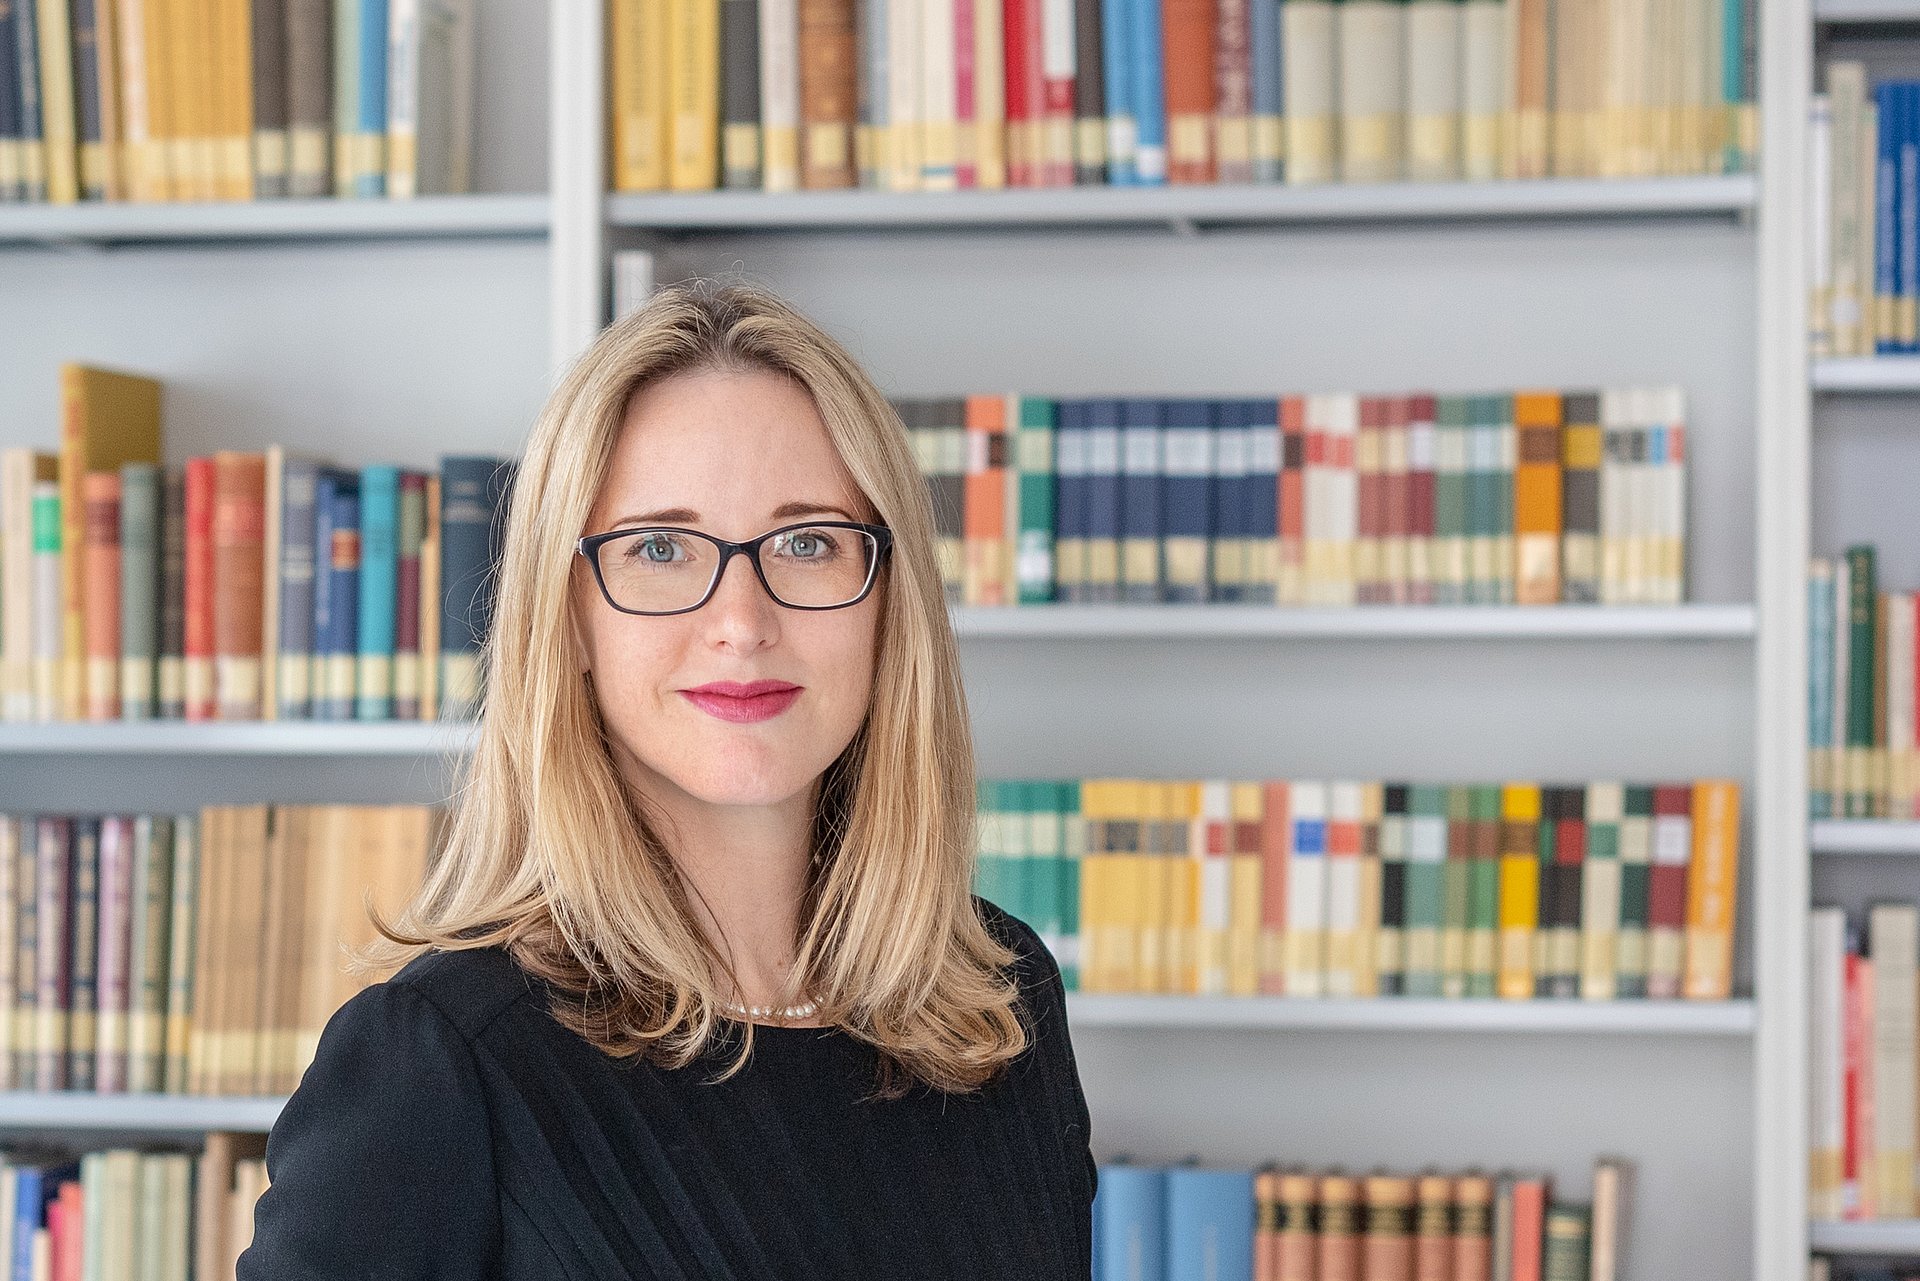 Prof. Alena Buyx heads the Institute for the History and Ethics of Medicine at TUM and has been Chair of the German Ethics Council since Spring 2020. 